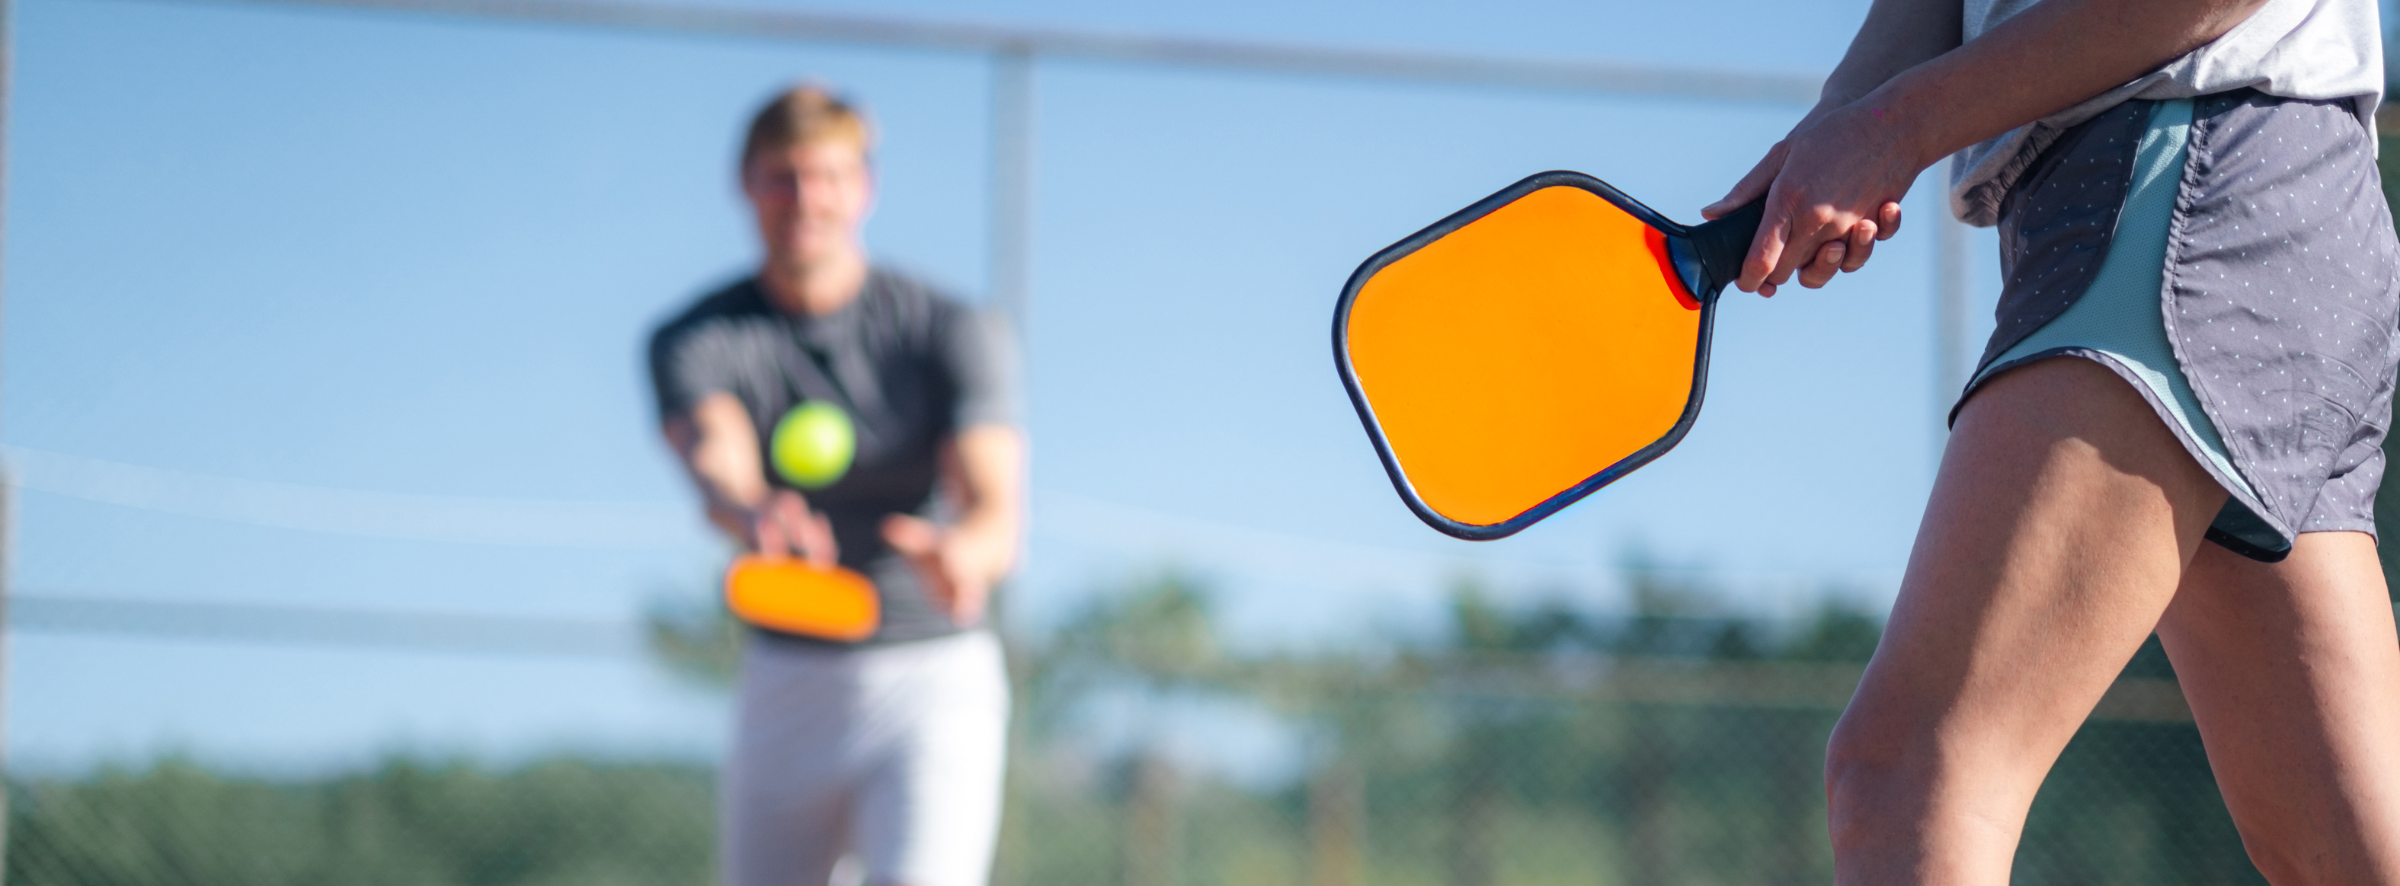 Pickleball: The Perfect After-Work Activity for Physicians